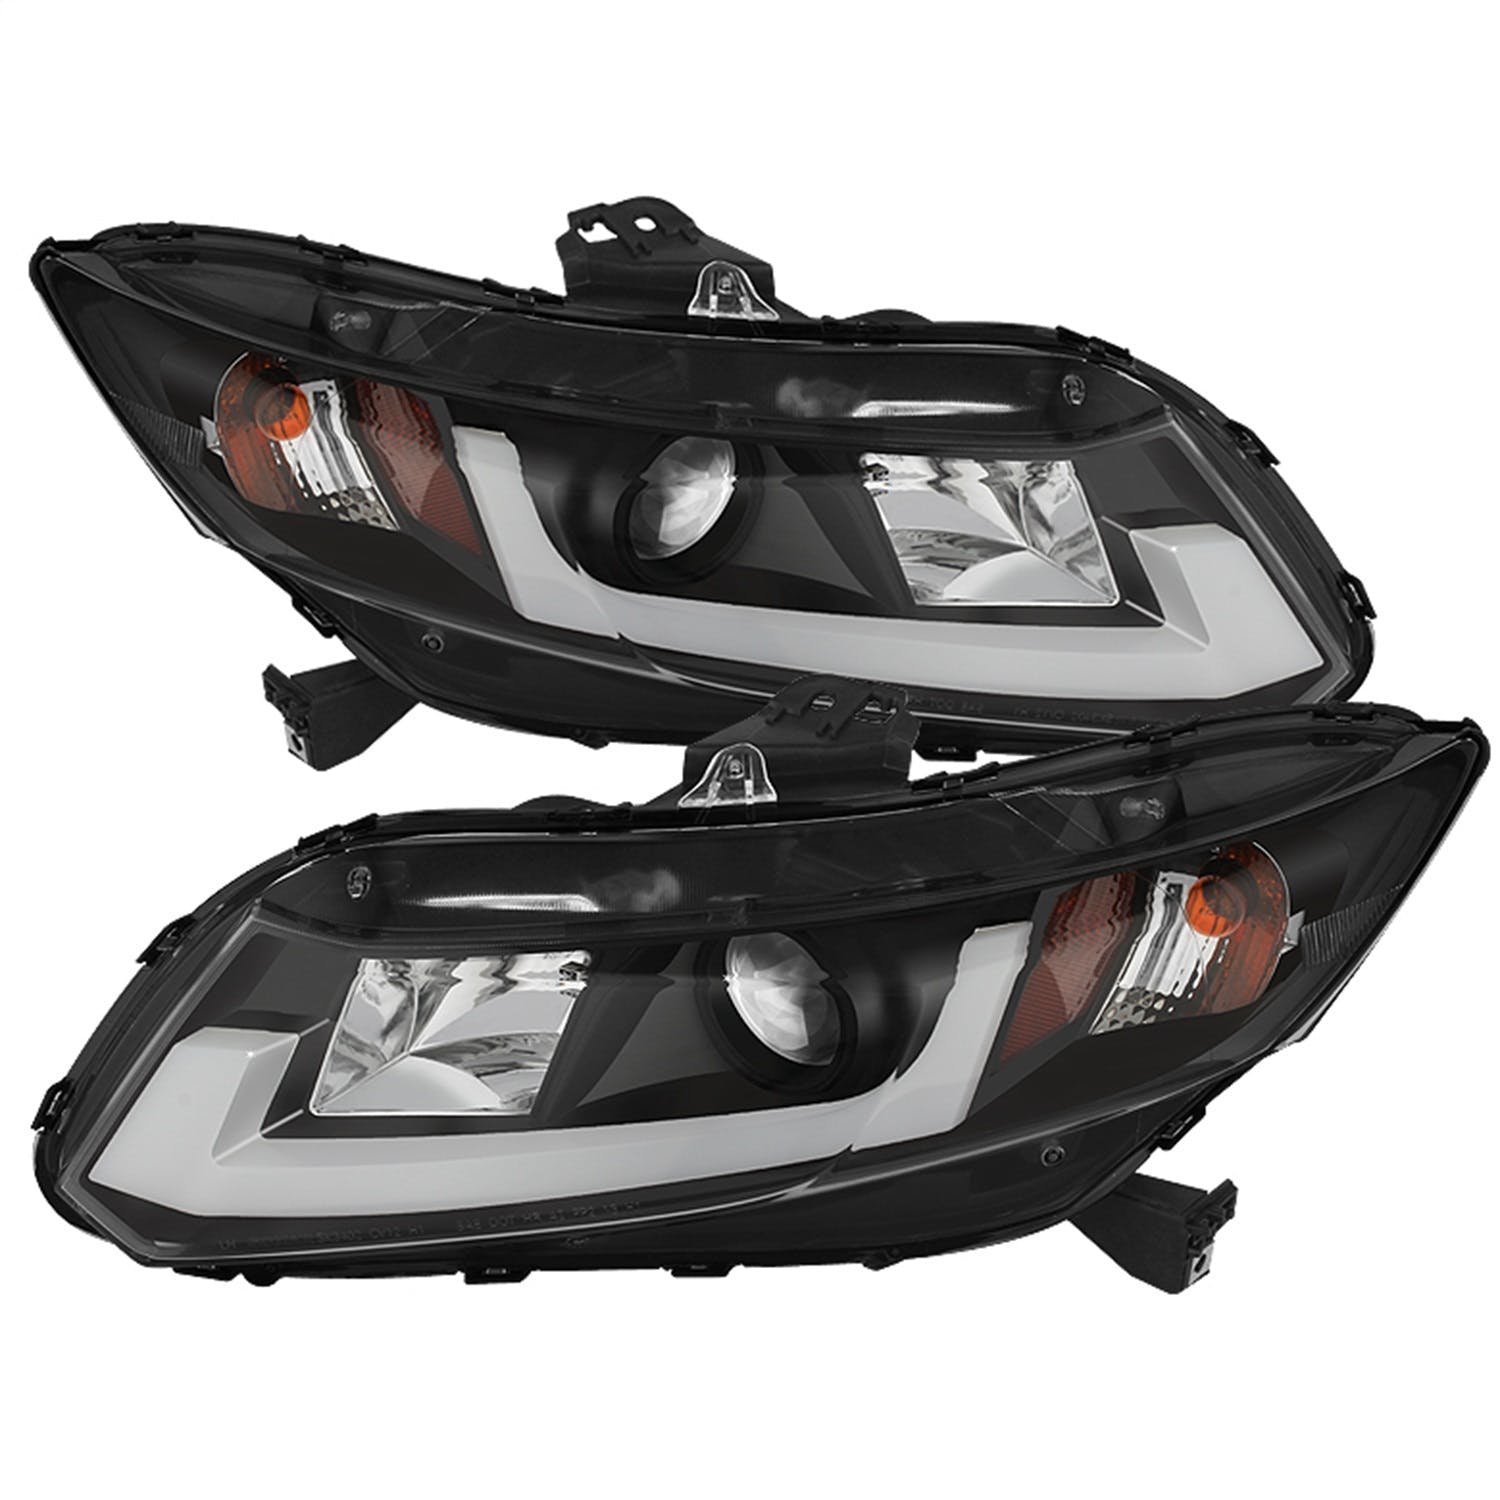 Spyder Auto 5076519 (Spyder) Honda Civic 2012-2014 Projector Headlights (does not fit the 2014 Civic